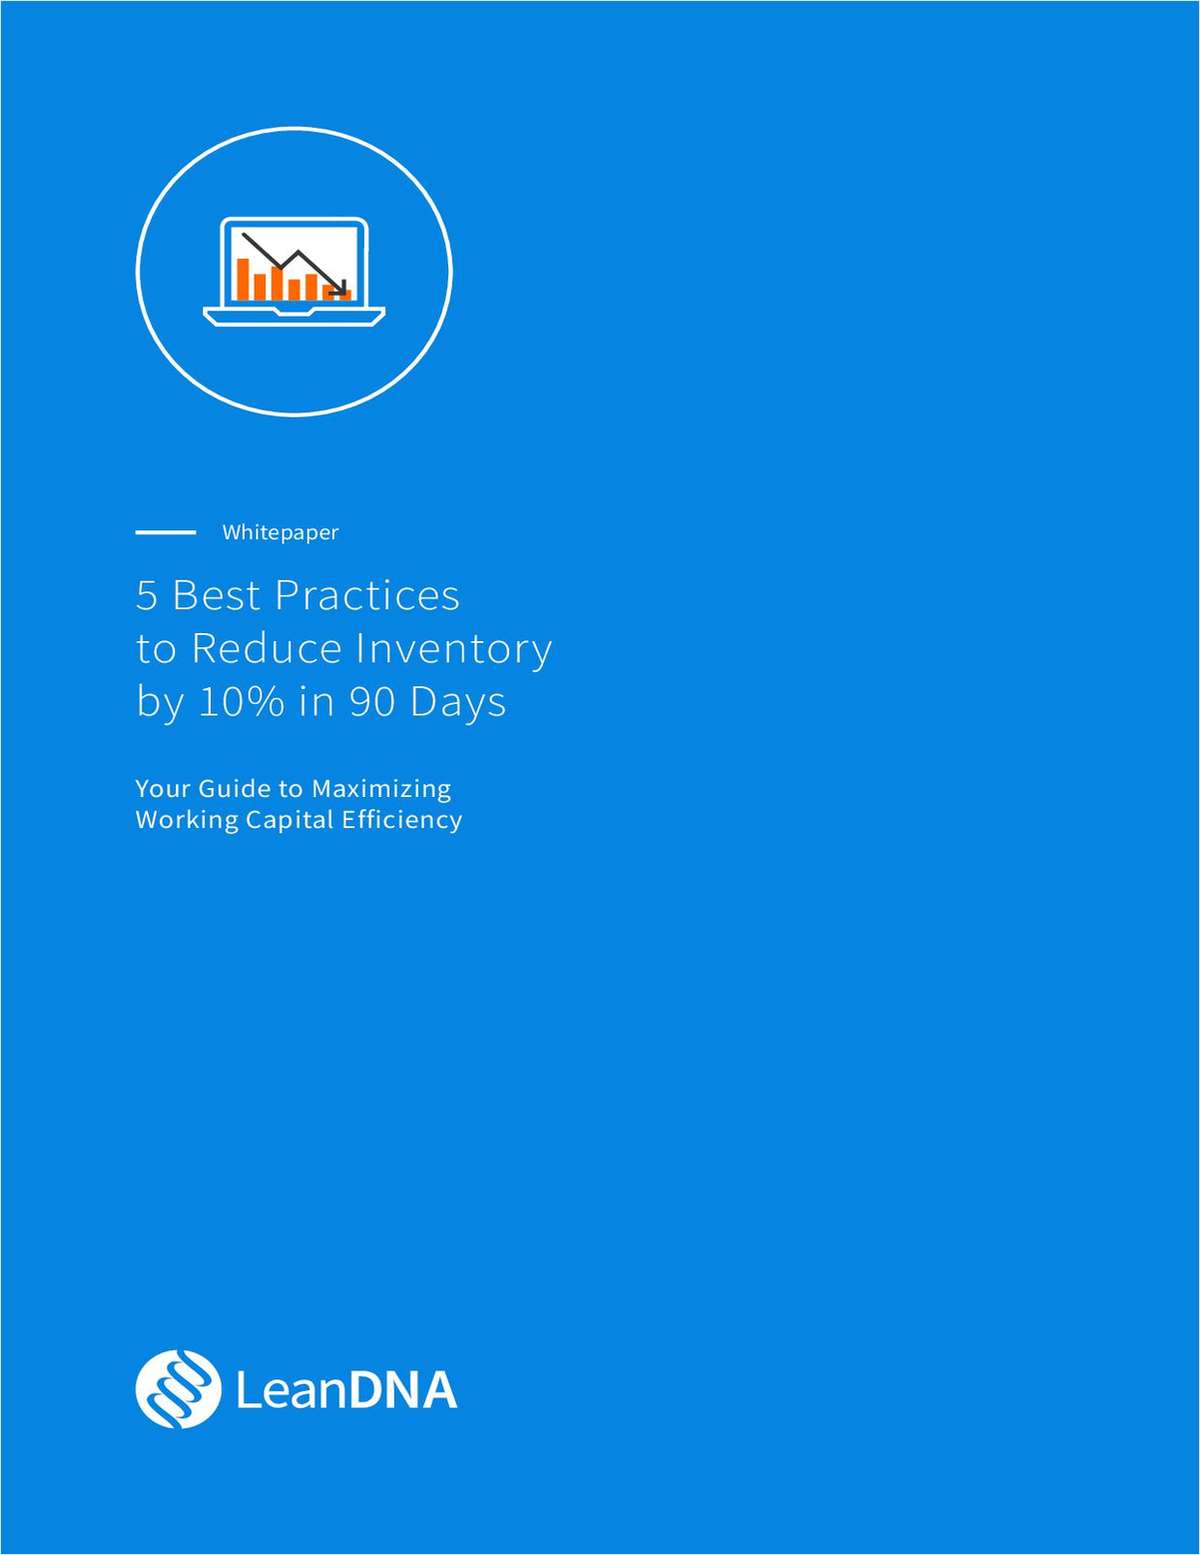 5 Best Practices to Reduce Inventory by 10% in 90 Days